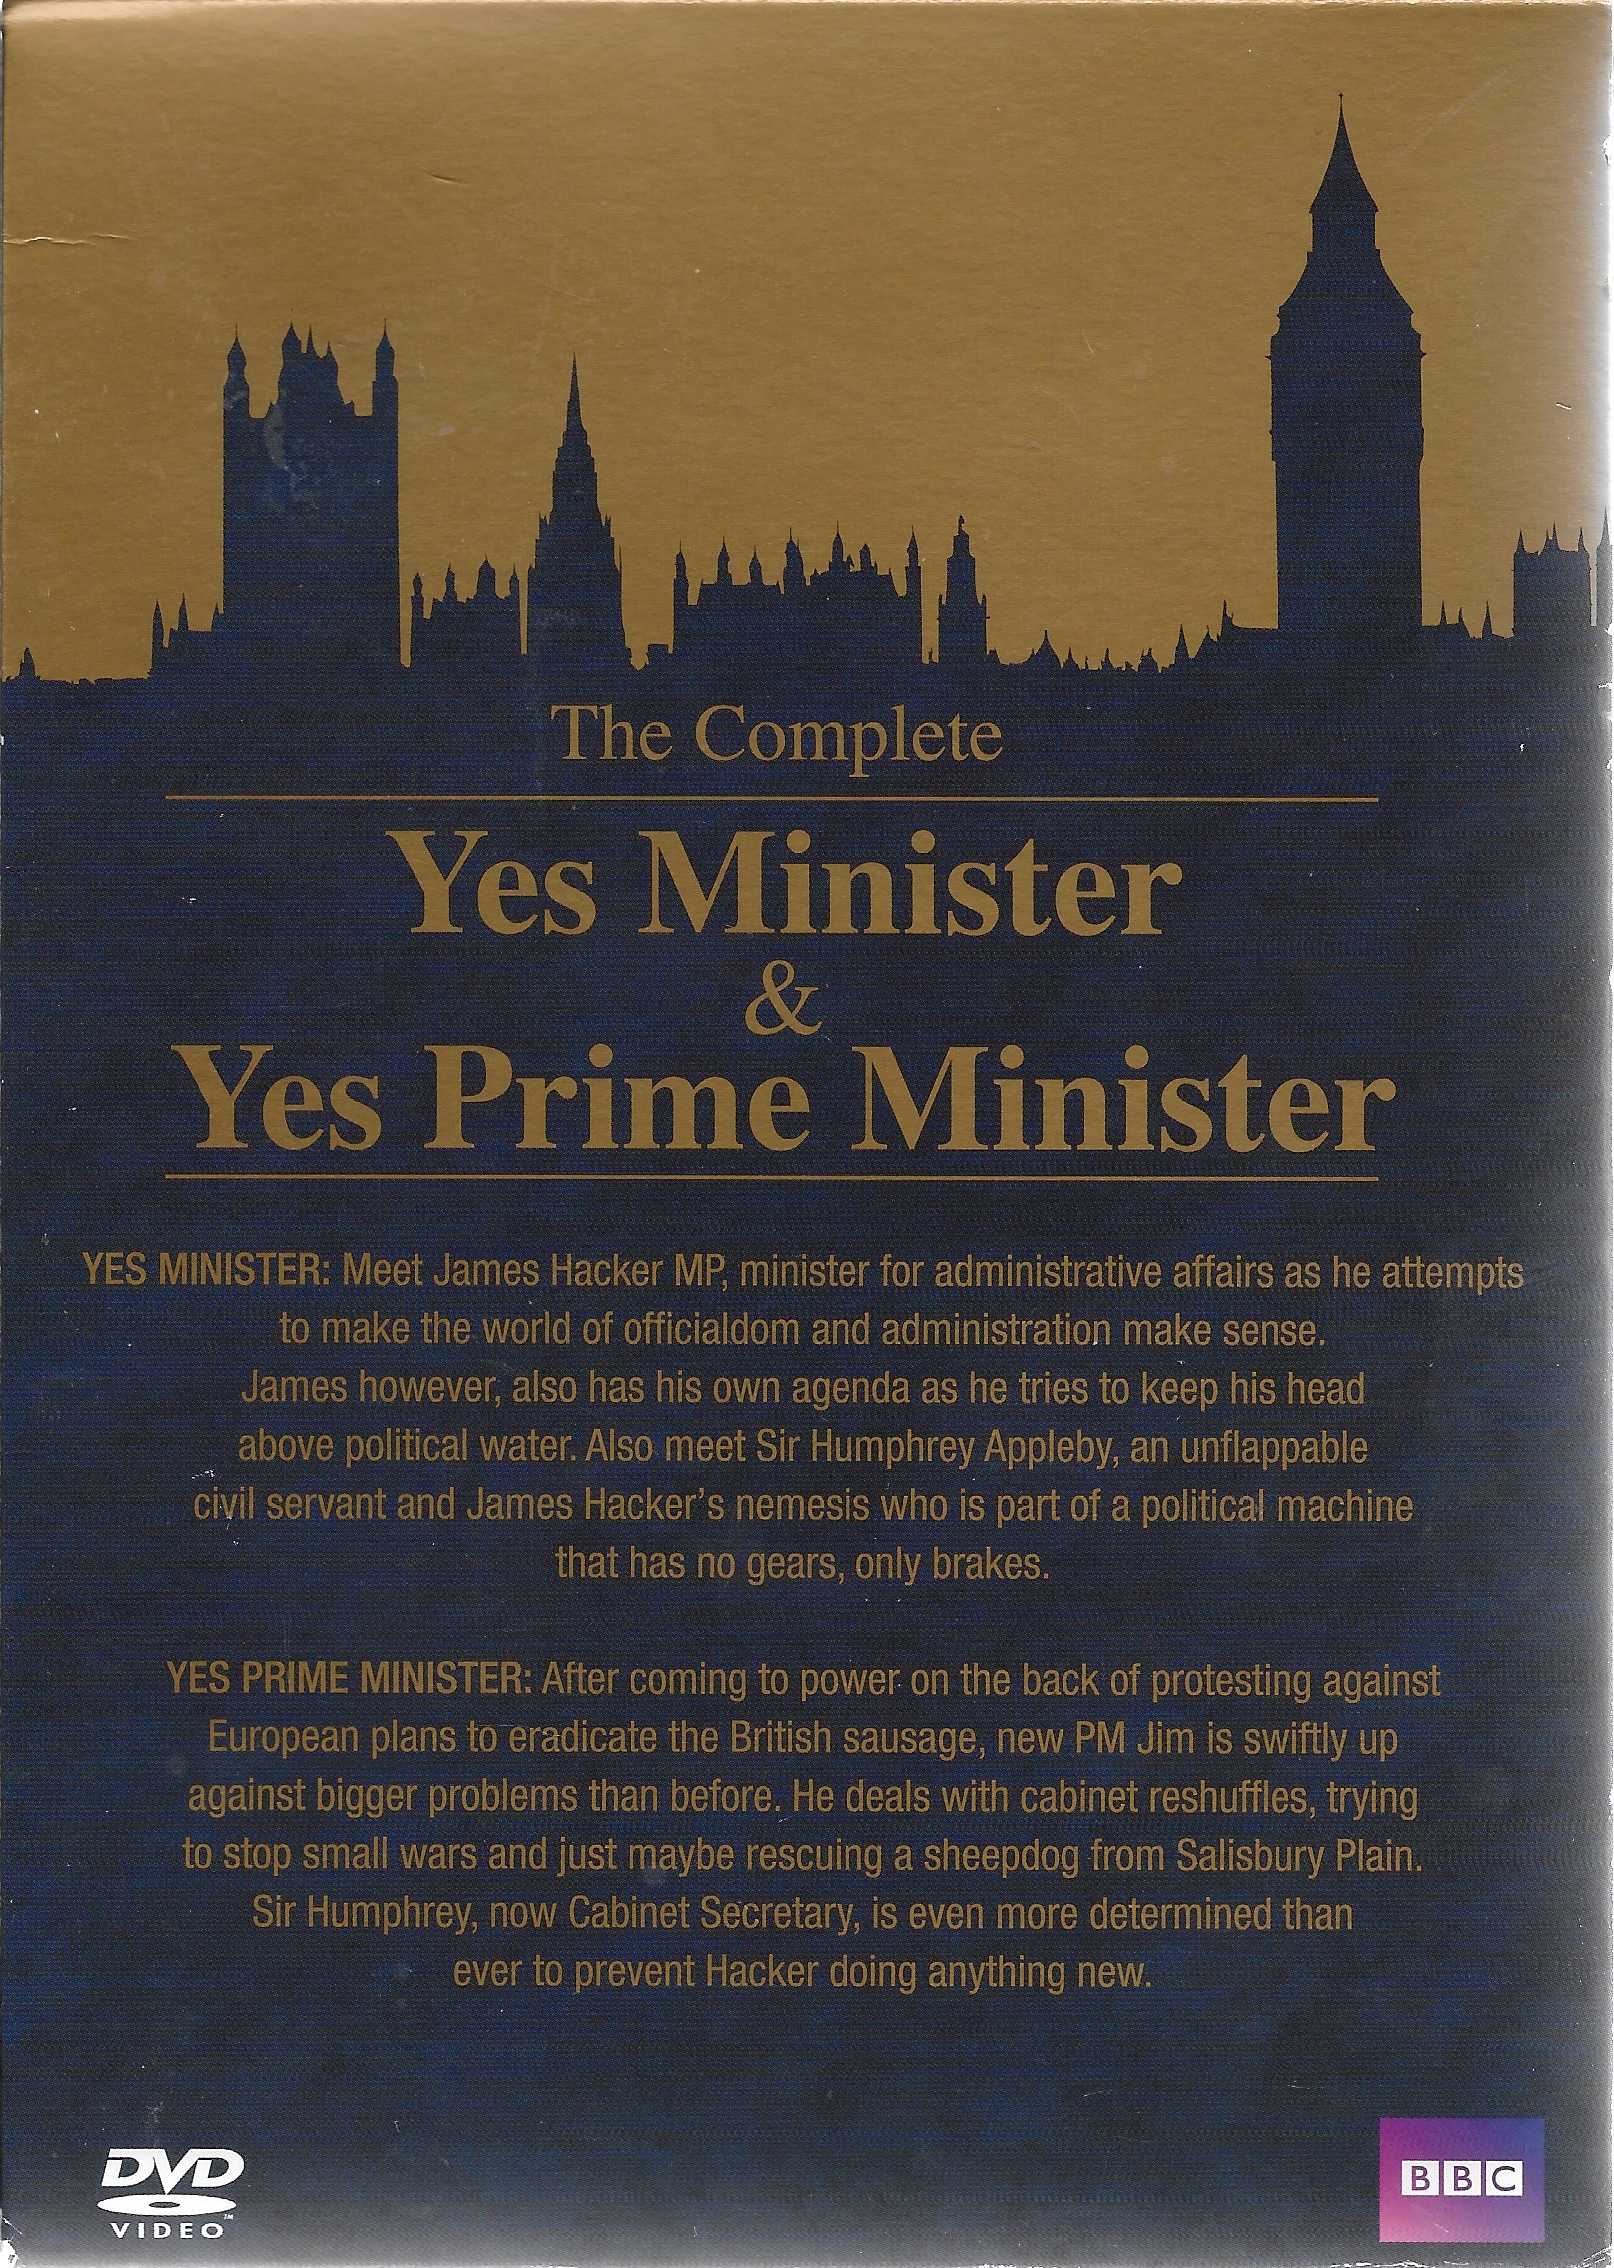 Picture of BBCDVD 2113 The complete Yes Minister & Yes, Prime Minister by artist Antony Jay / Jonathan Lynn from the BBC records and Tapes library